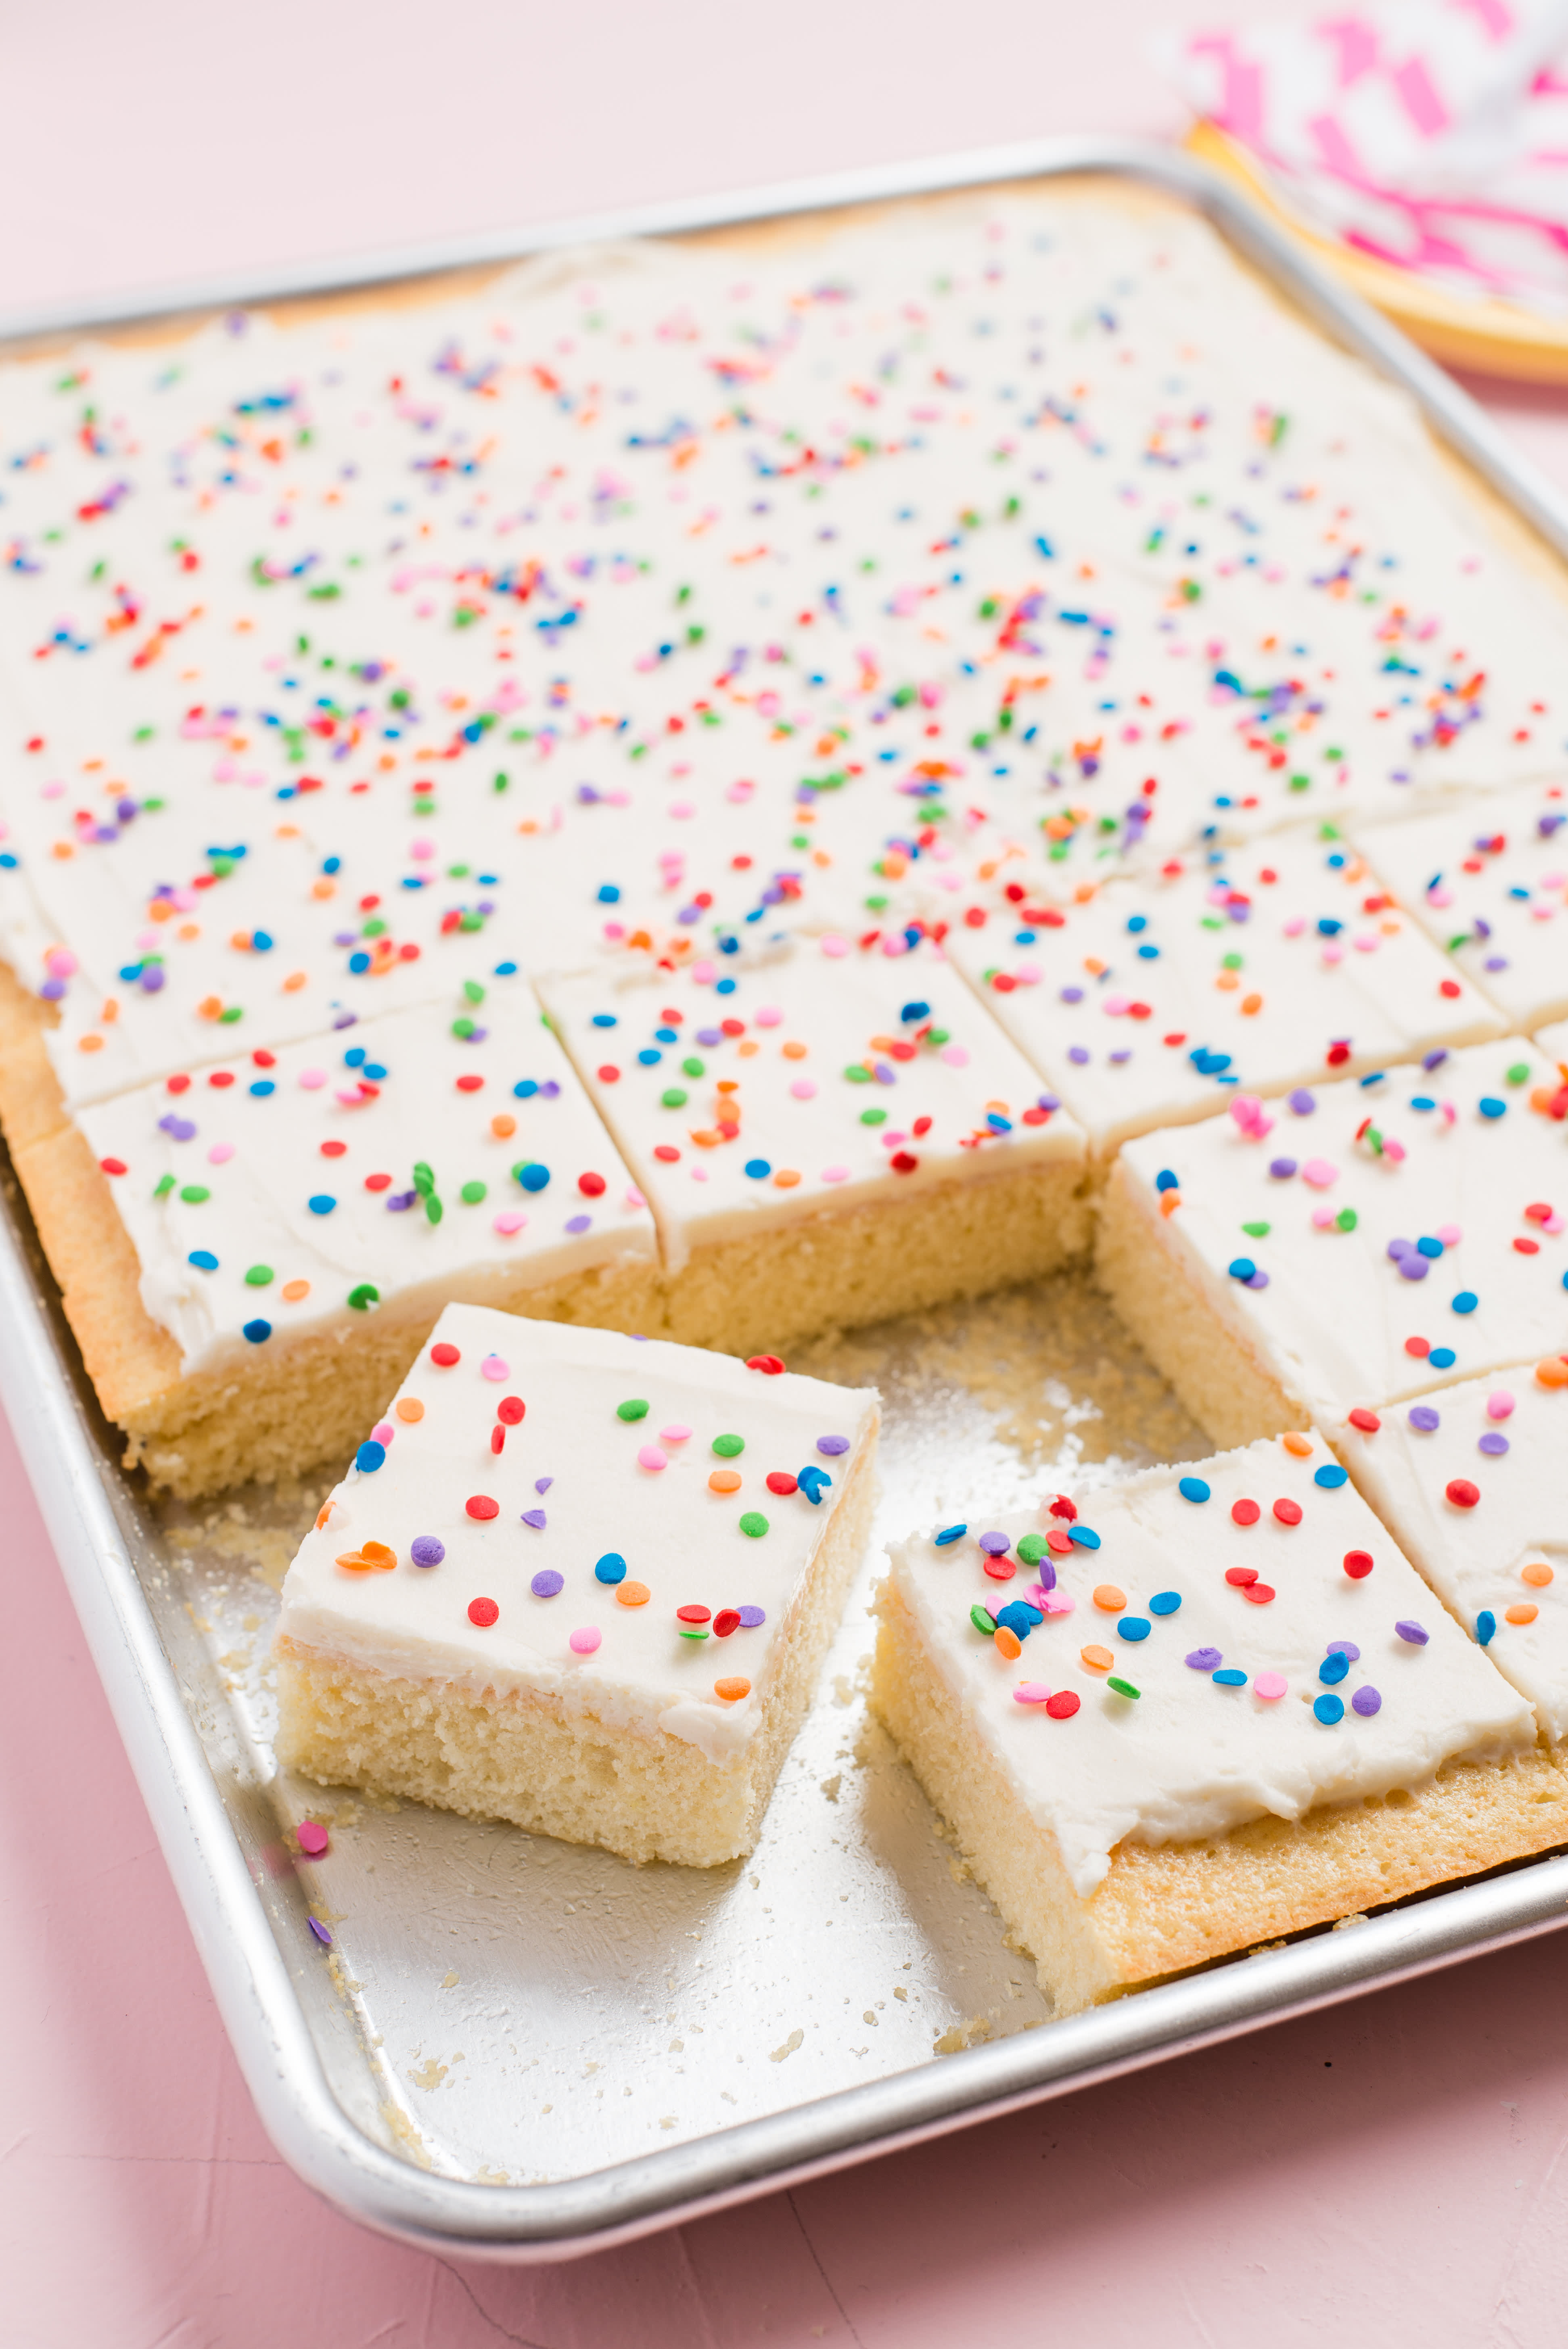 I Tried Molly Yeh's Sprinkle Cake Recipe | The Kitchn